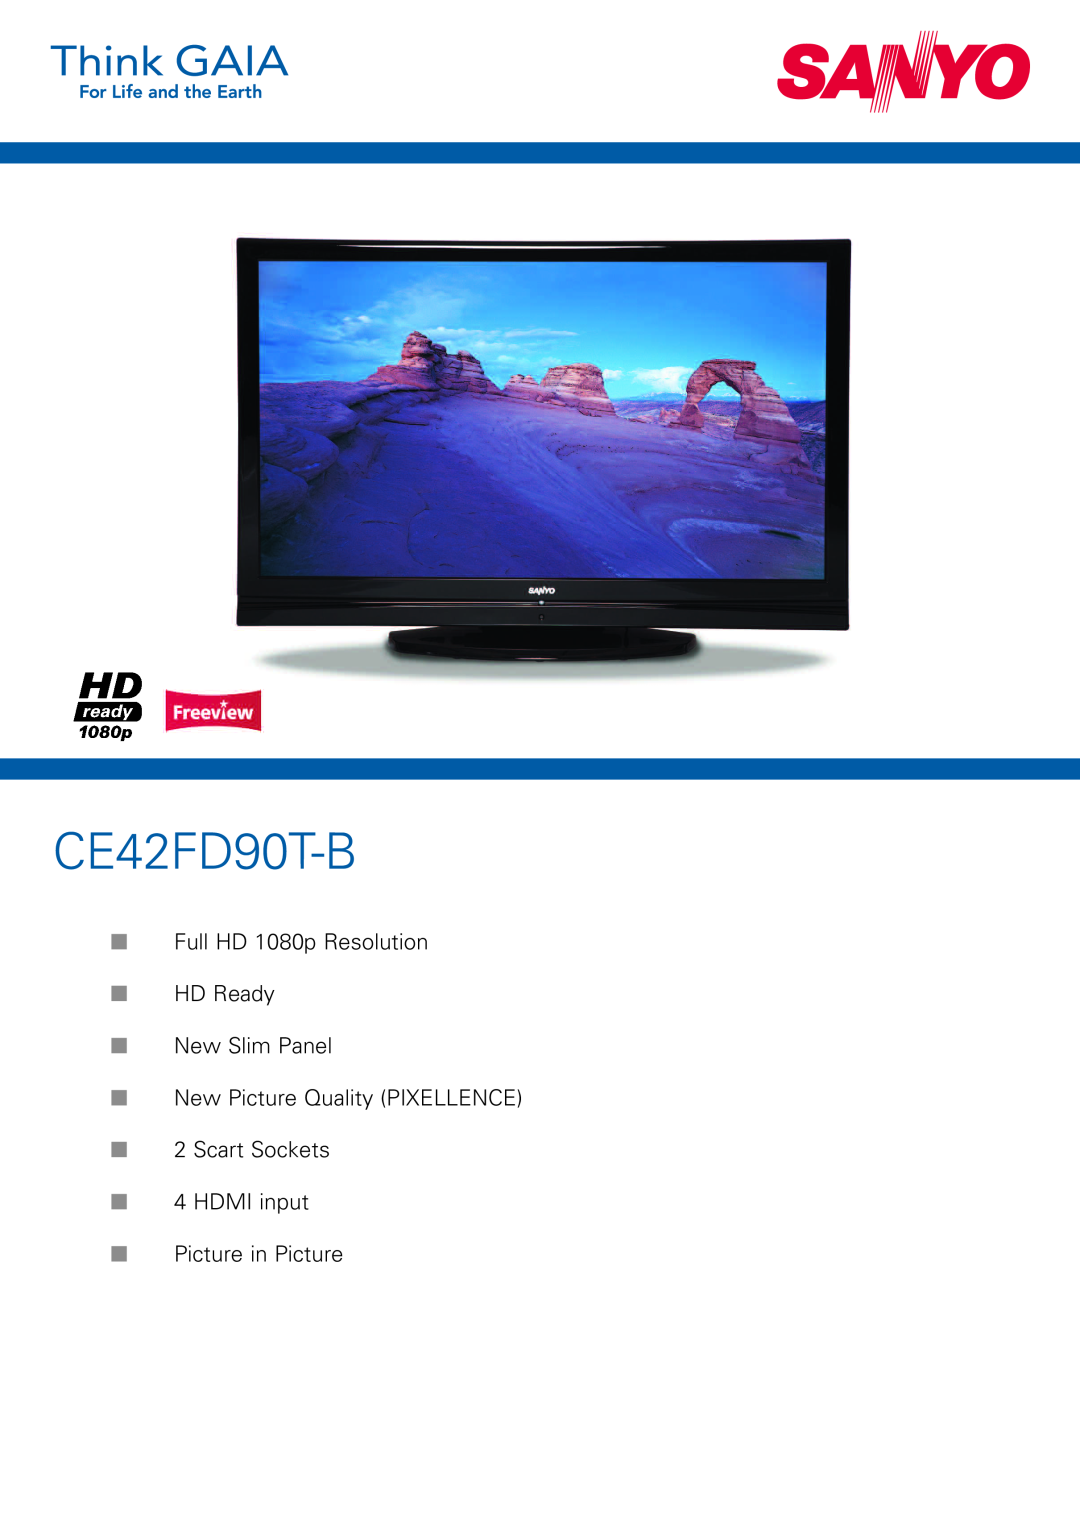 Sanyo CE42FD90T-B manual Full HD 1080p Resolution HD Ready New Slim Panel, Picture in Picture 